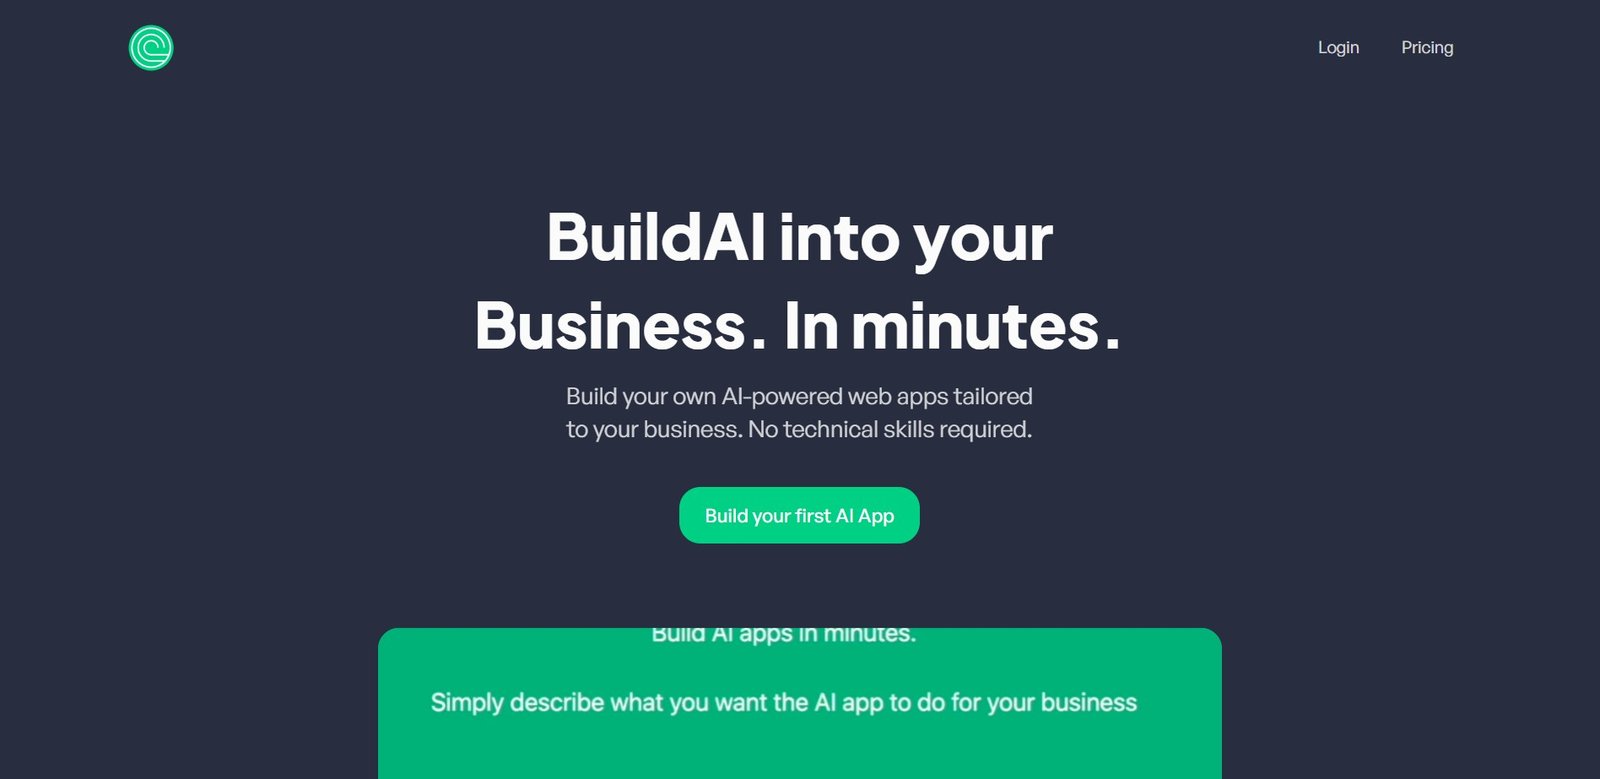 BuildAI is an AI no-code platform that allows businesses to create AI-powered web apps without the need for technical expertise